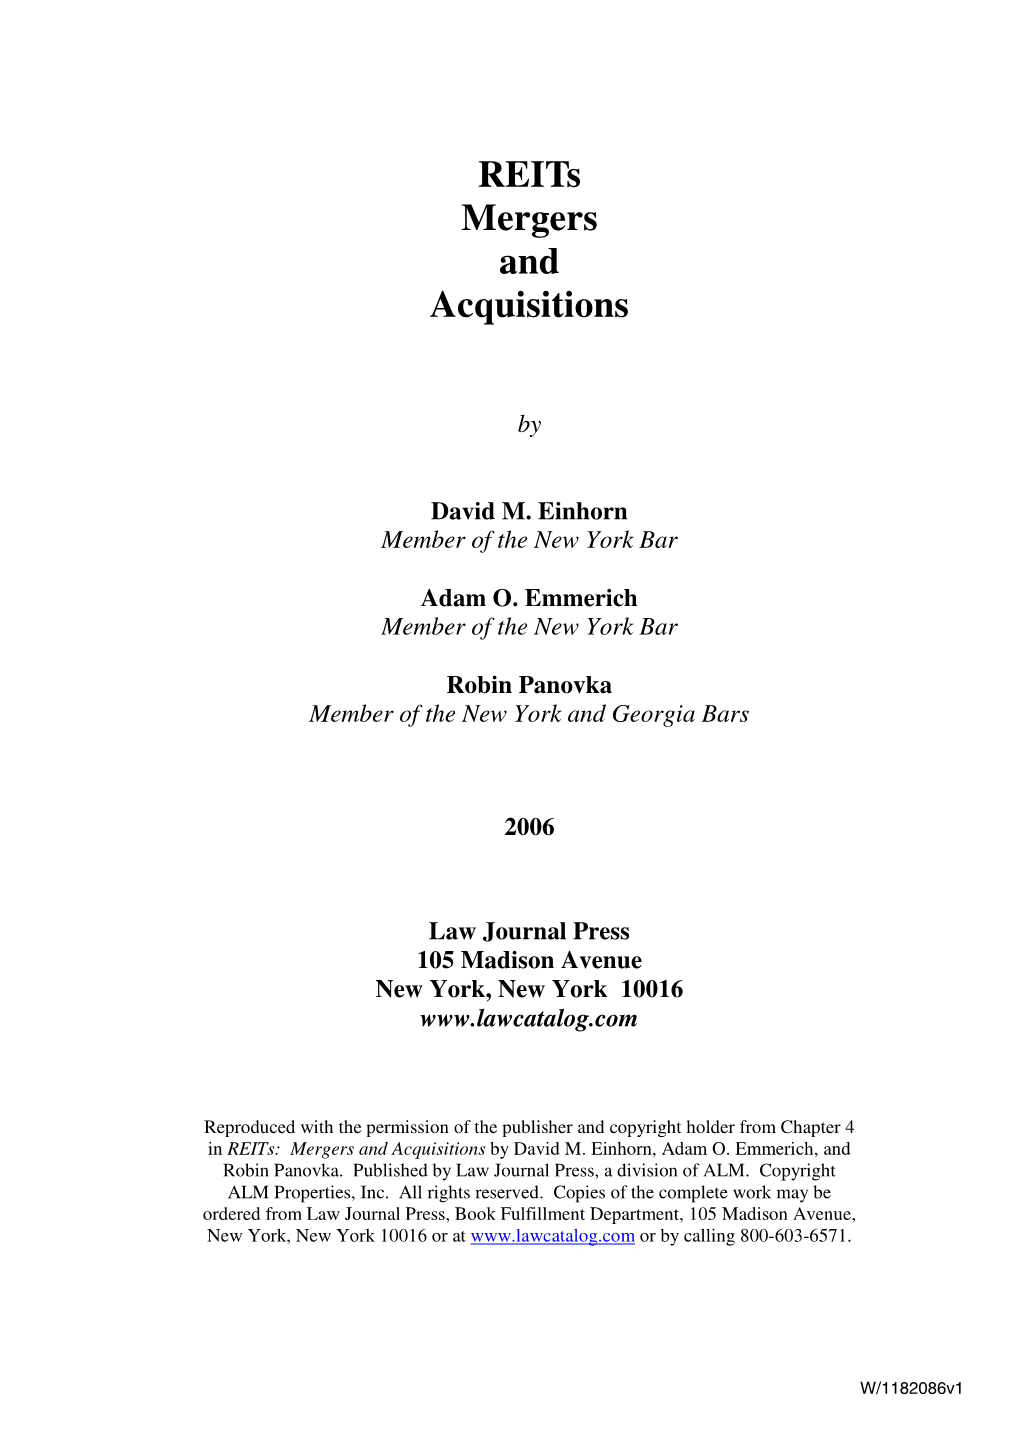 REIT M&A Book -- Chapter 4 W- Reproduction Permission Cover